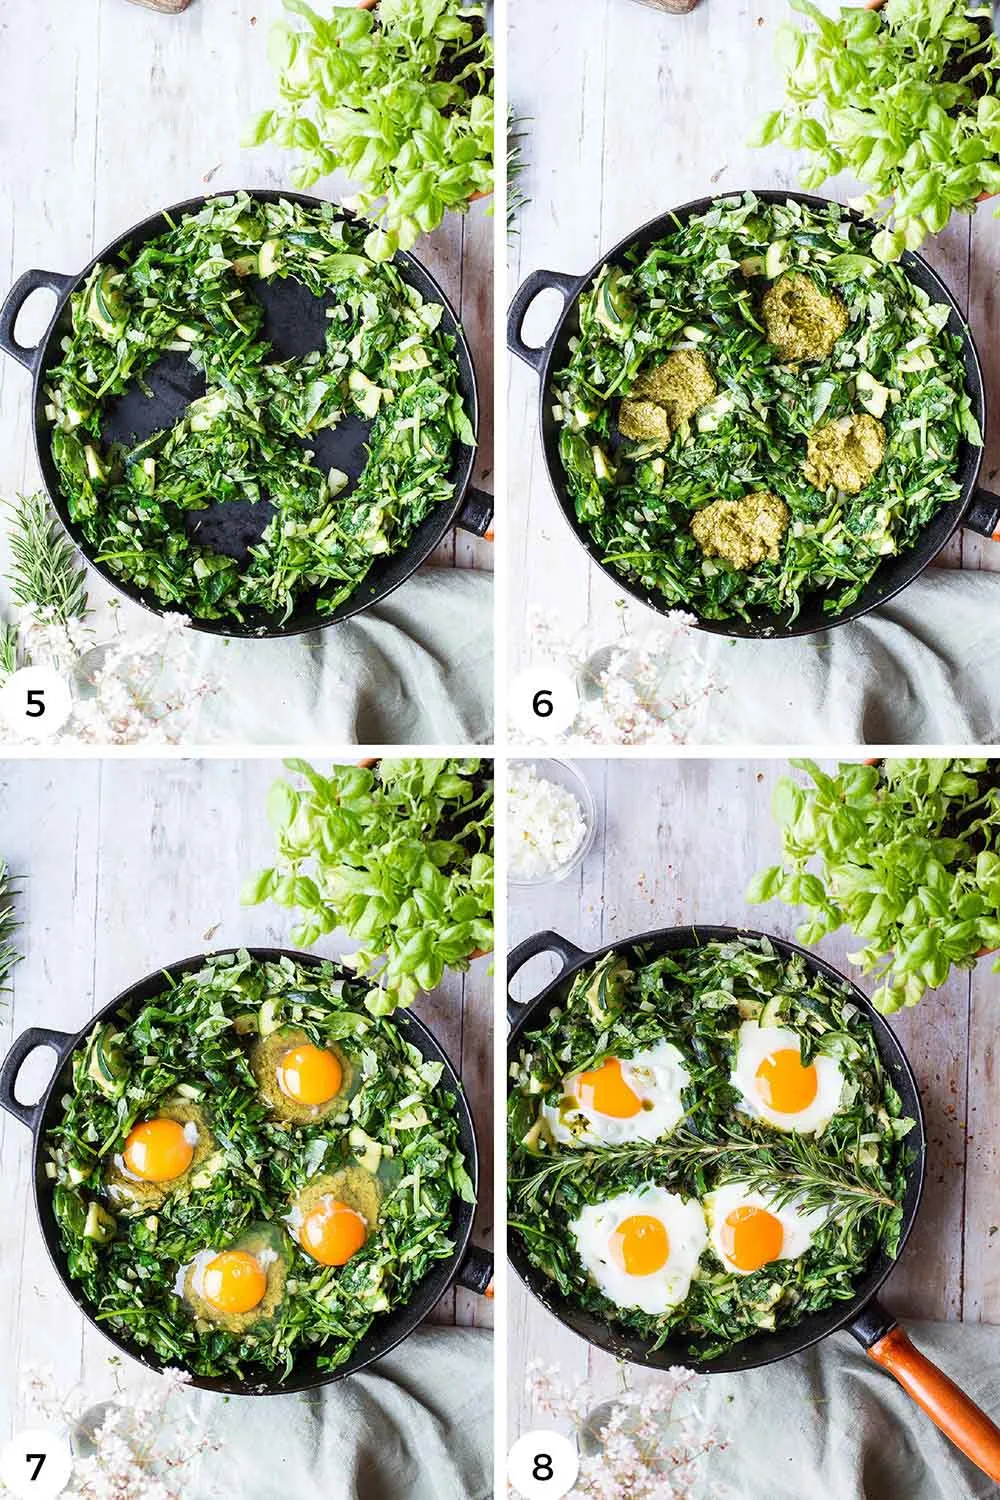 Steps to cook the eggs in the spinach.